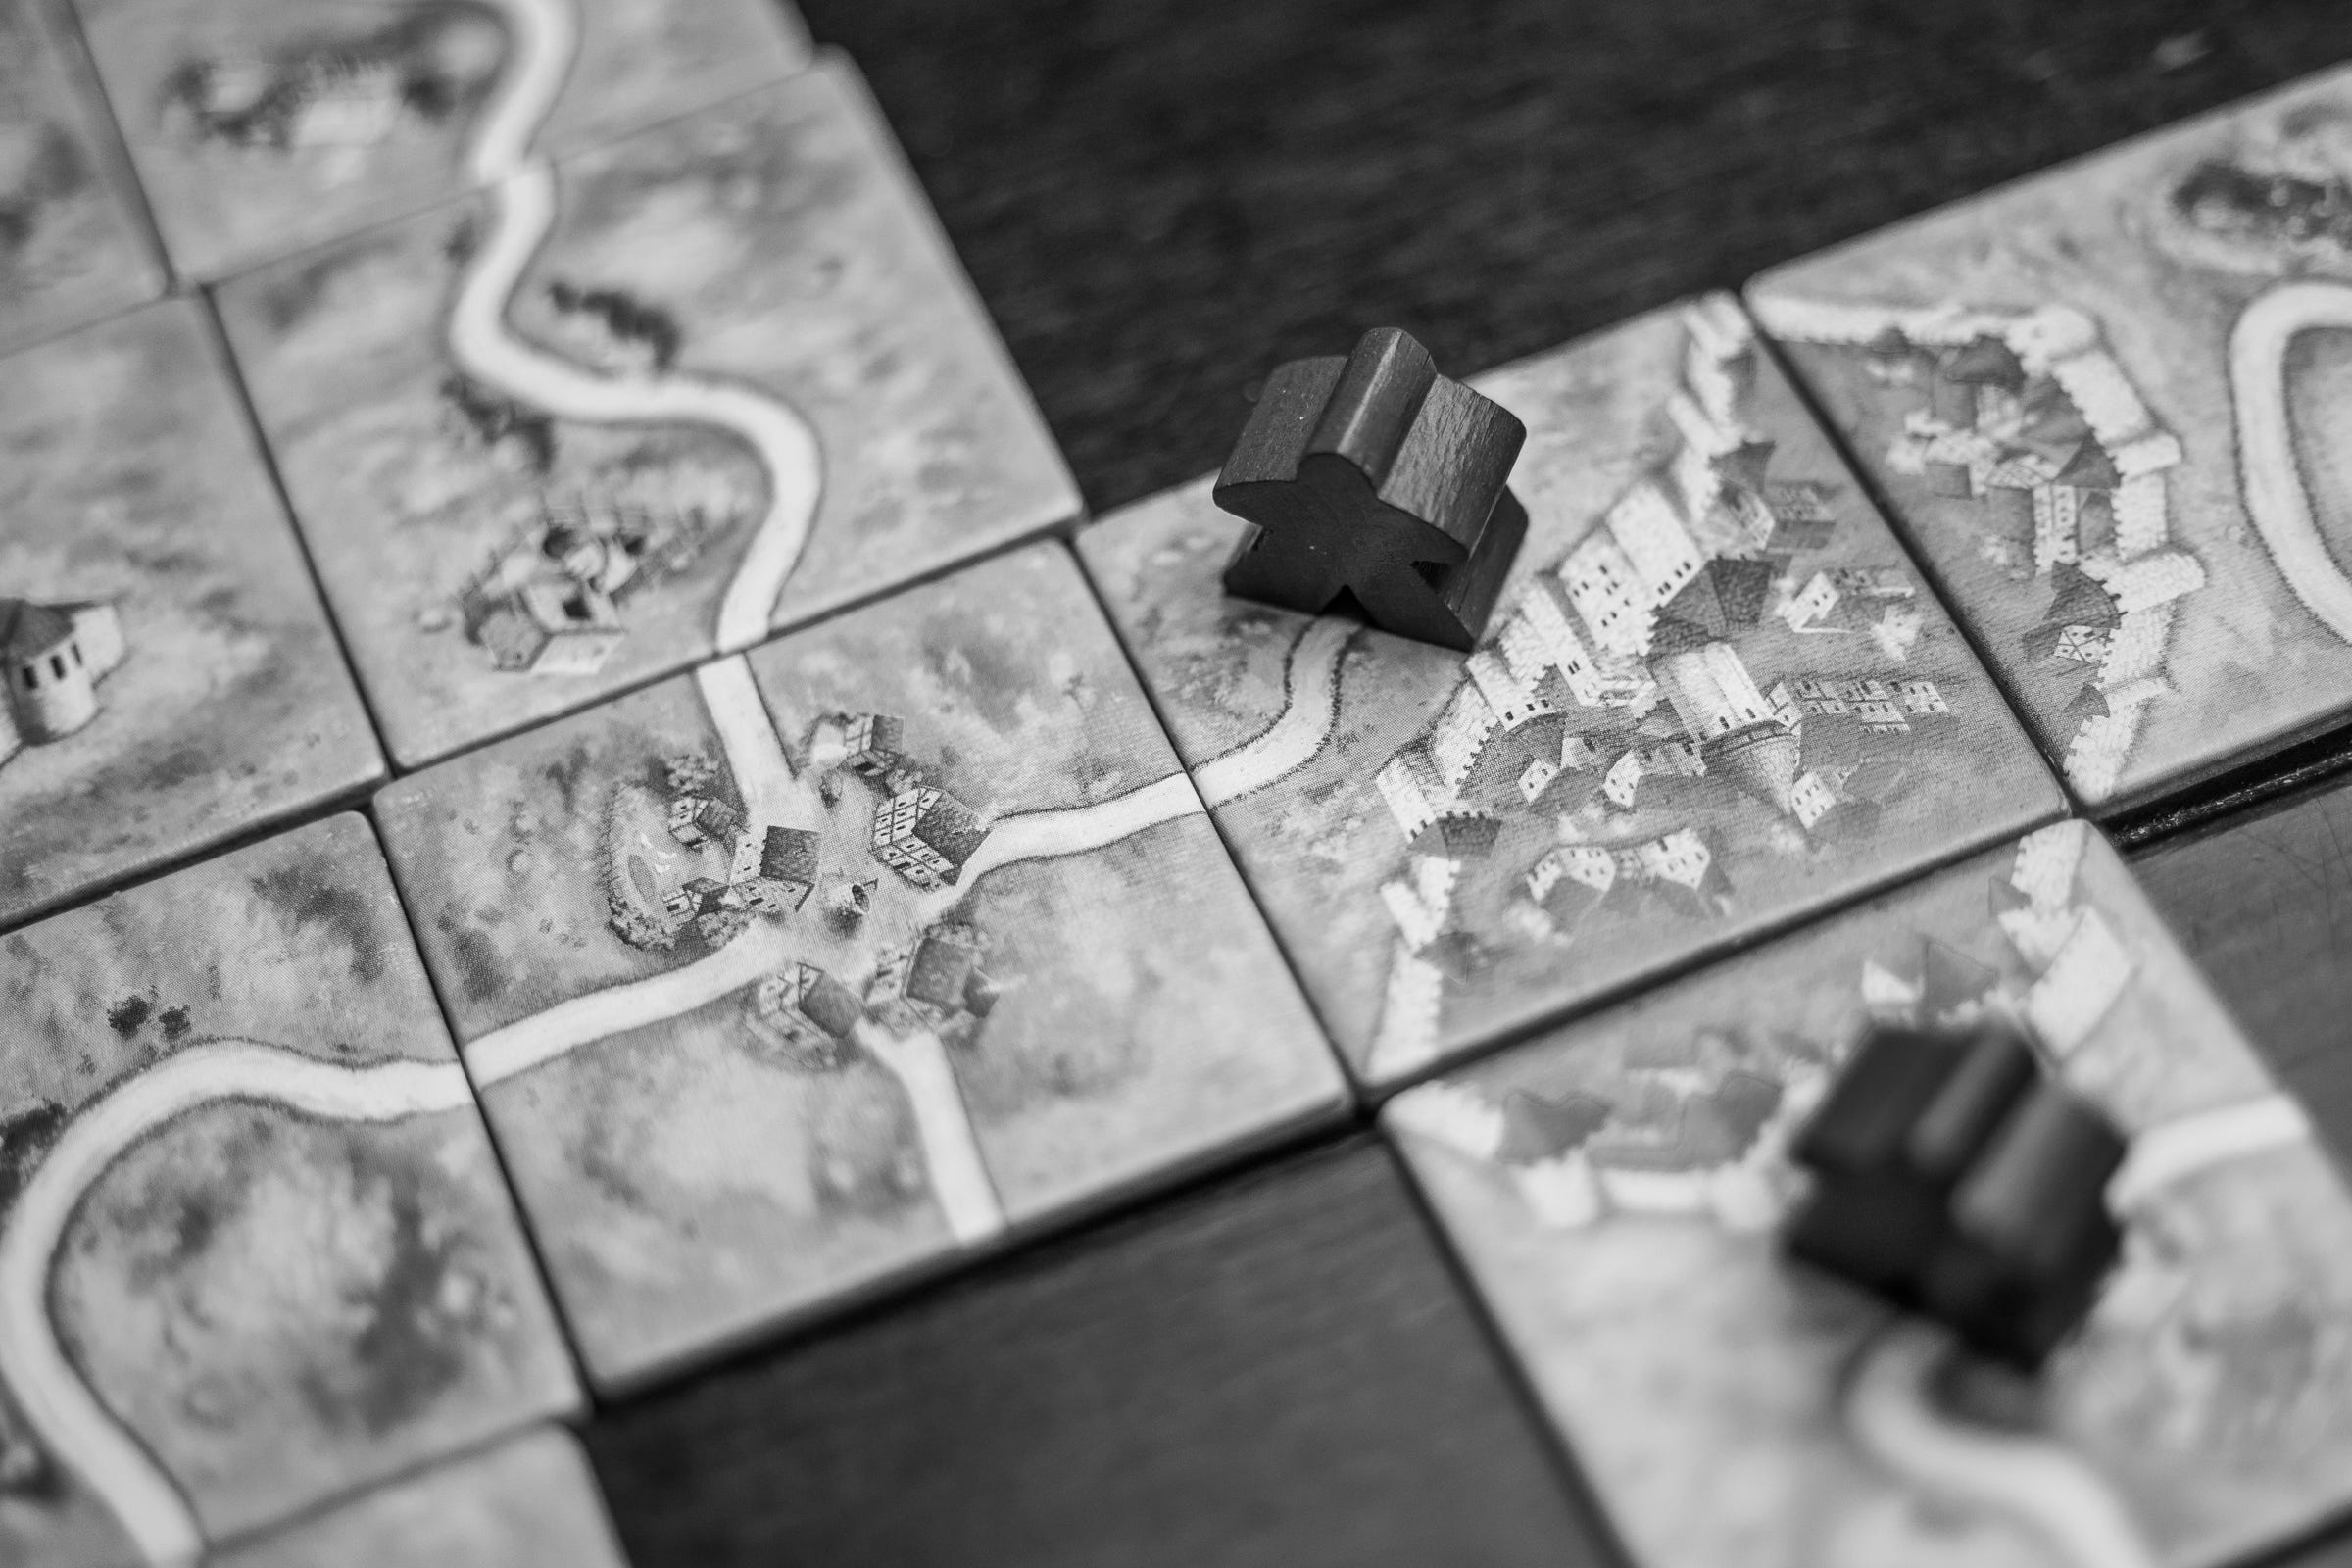 Issue 17: History of the Meeple - by Matt Montgomery